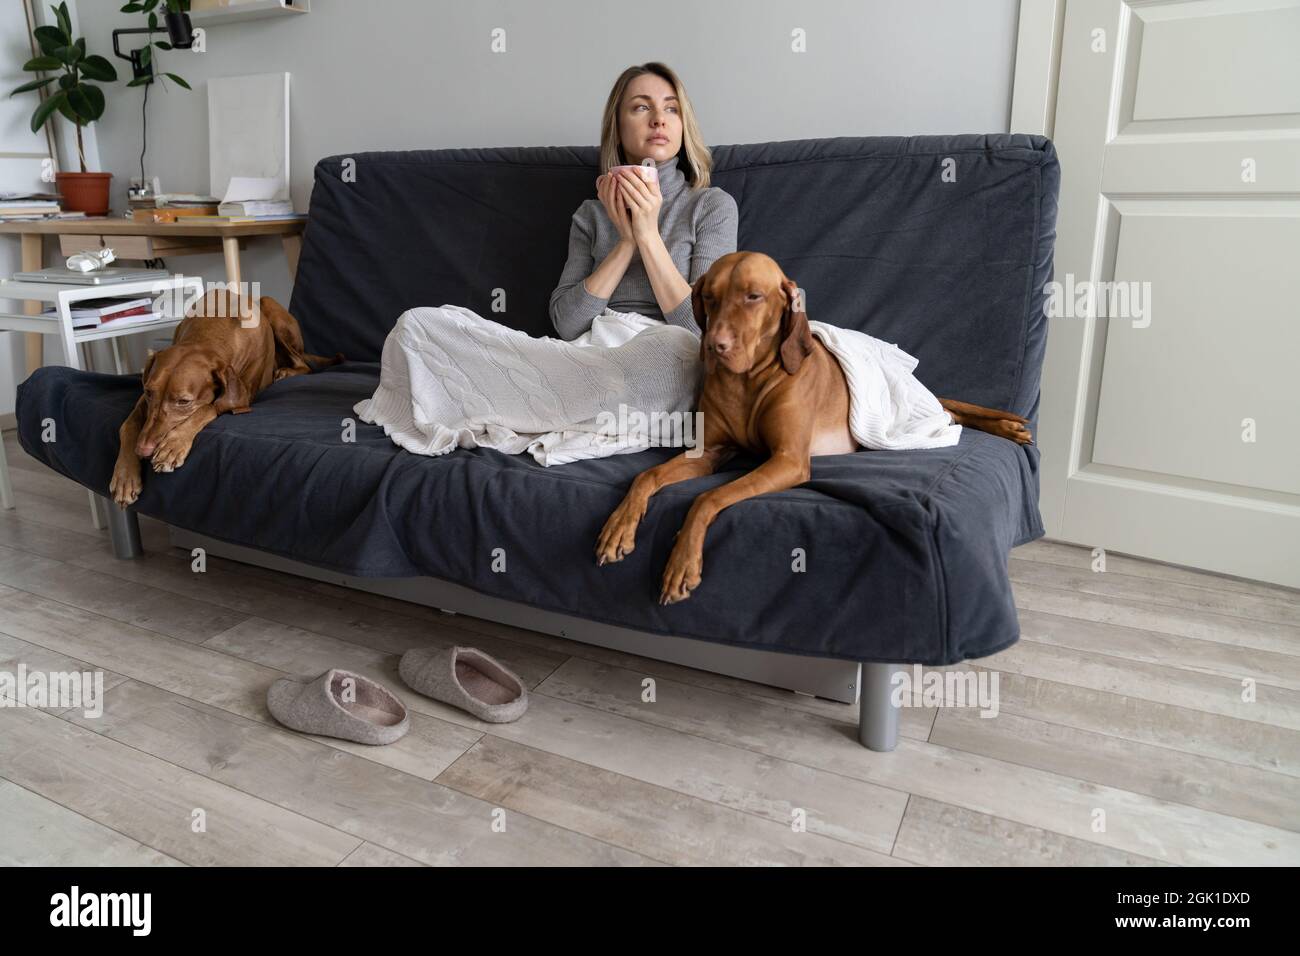 Indifferent woman struggle with bipolar depression and mental disorder stay at home with two dogs Stock Photo